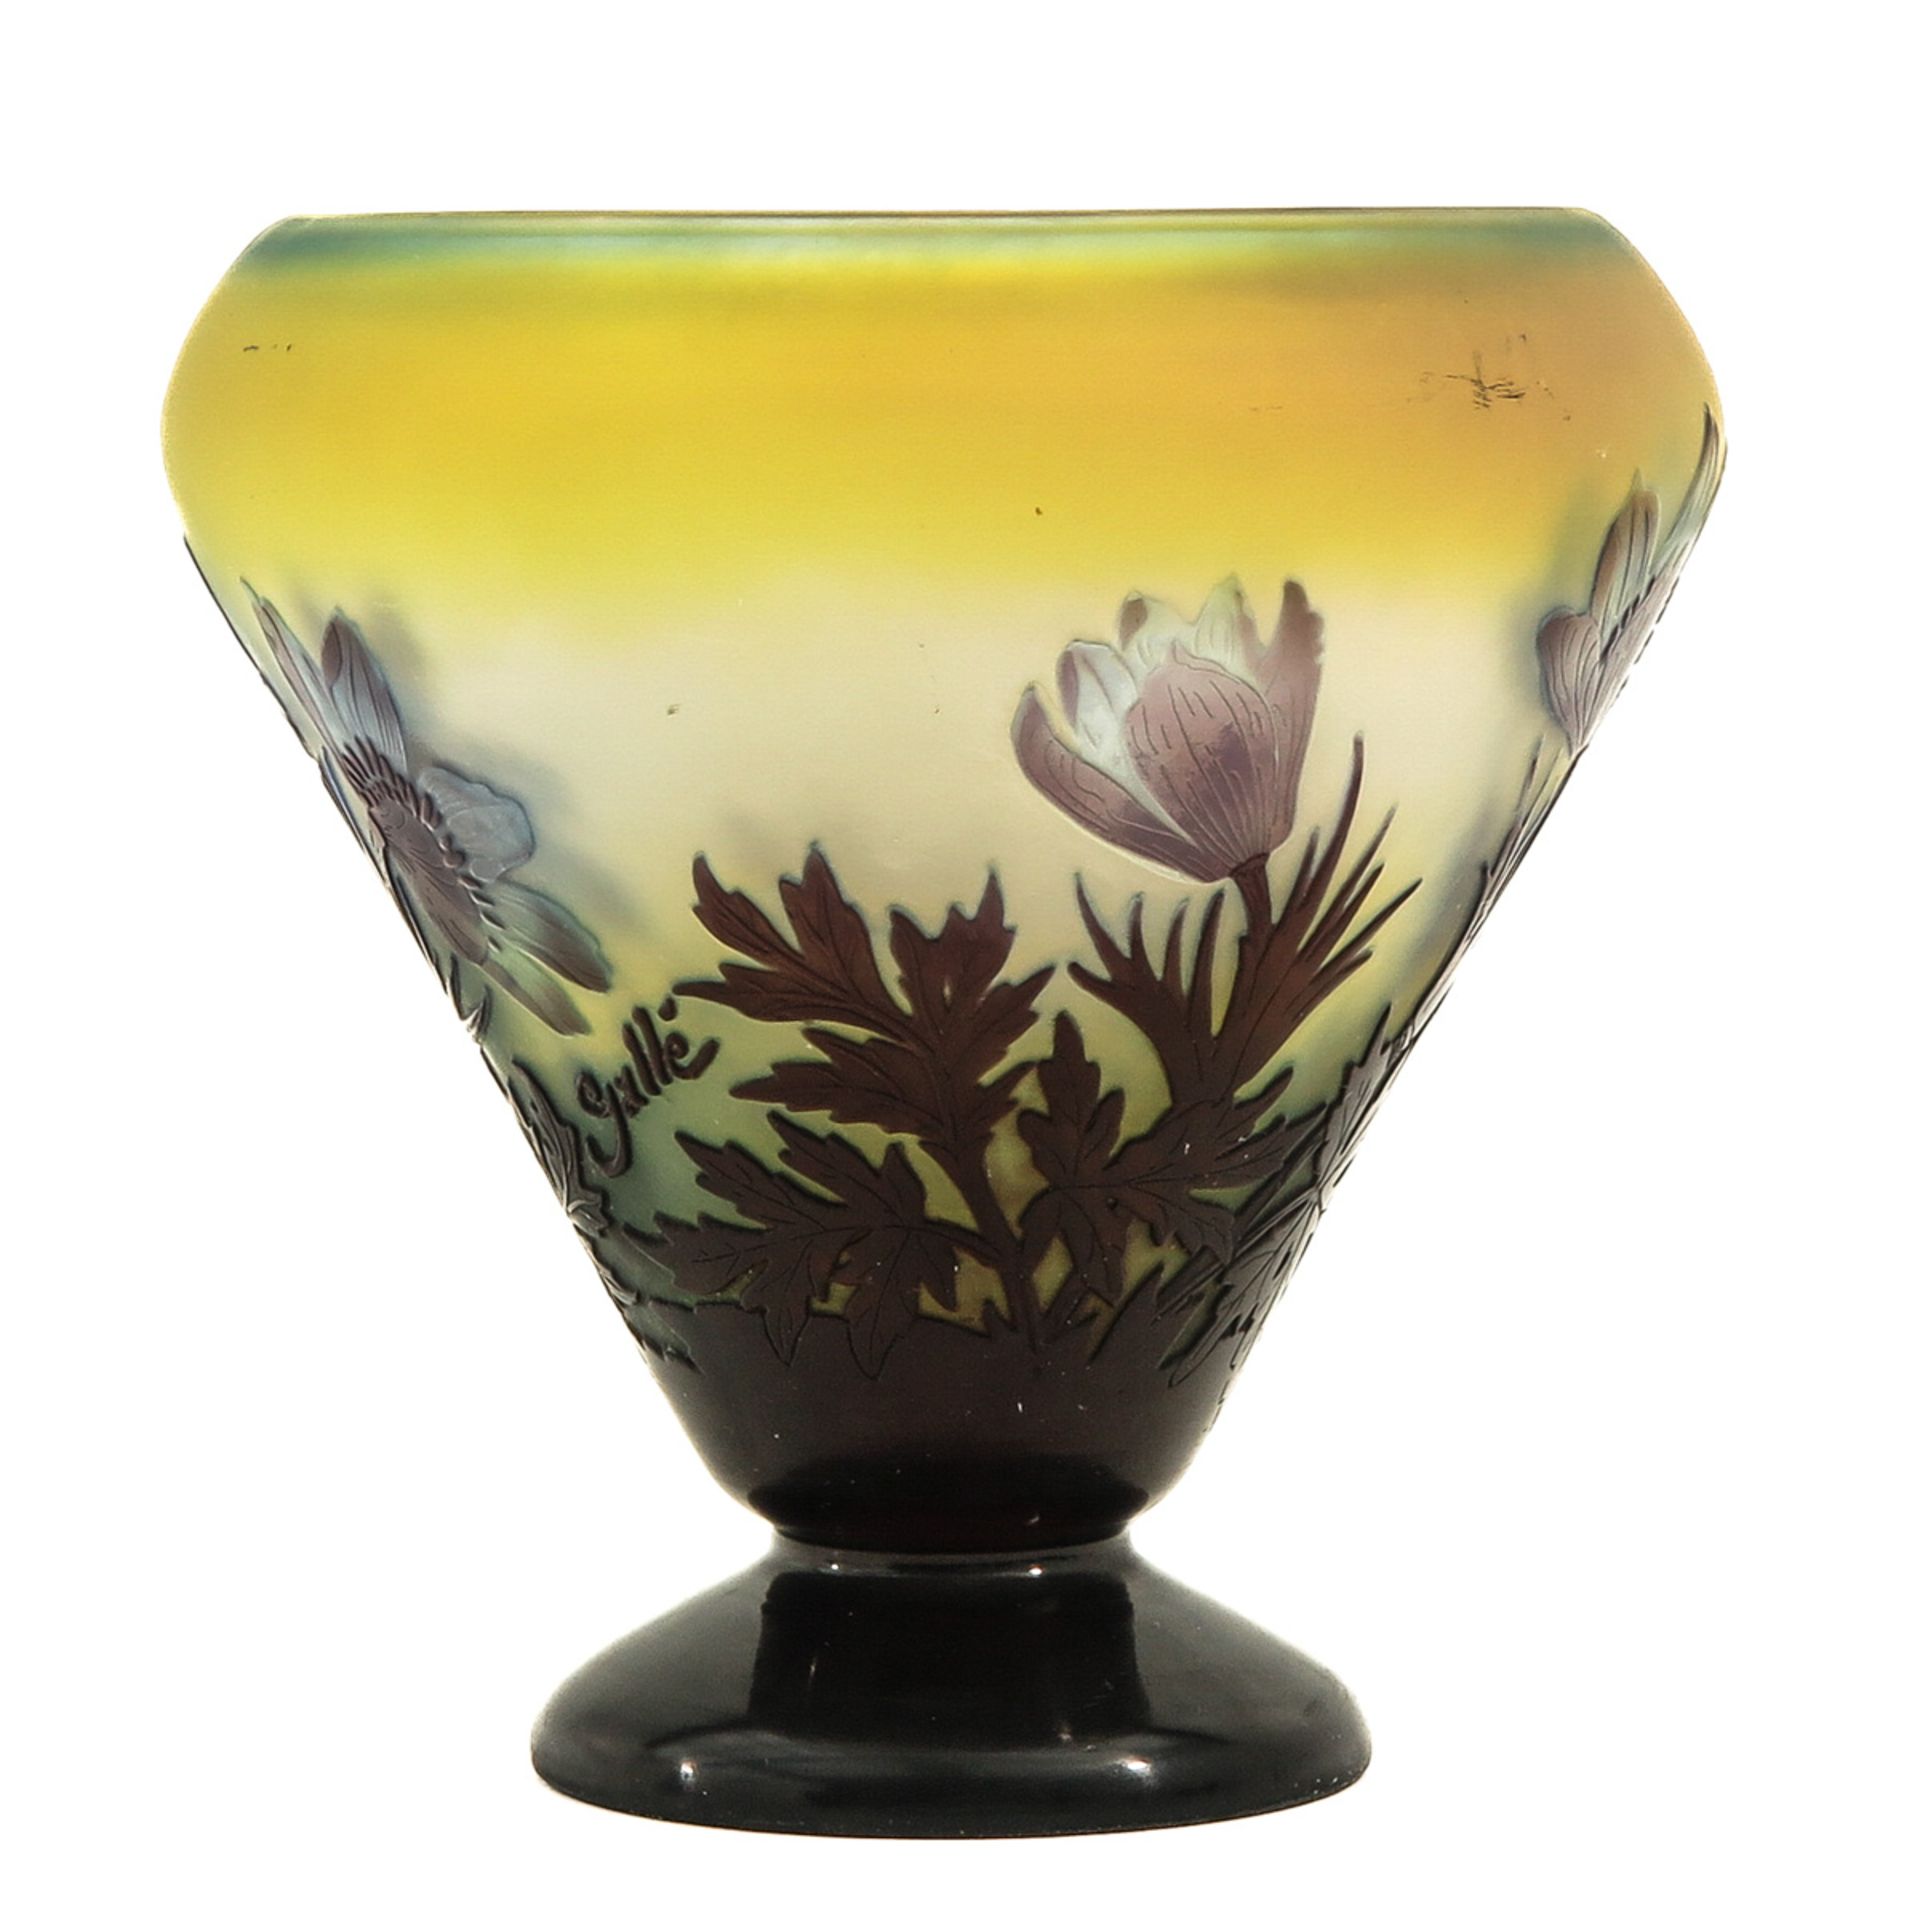 A Signed Galle Vase - Image 2 of 8